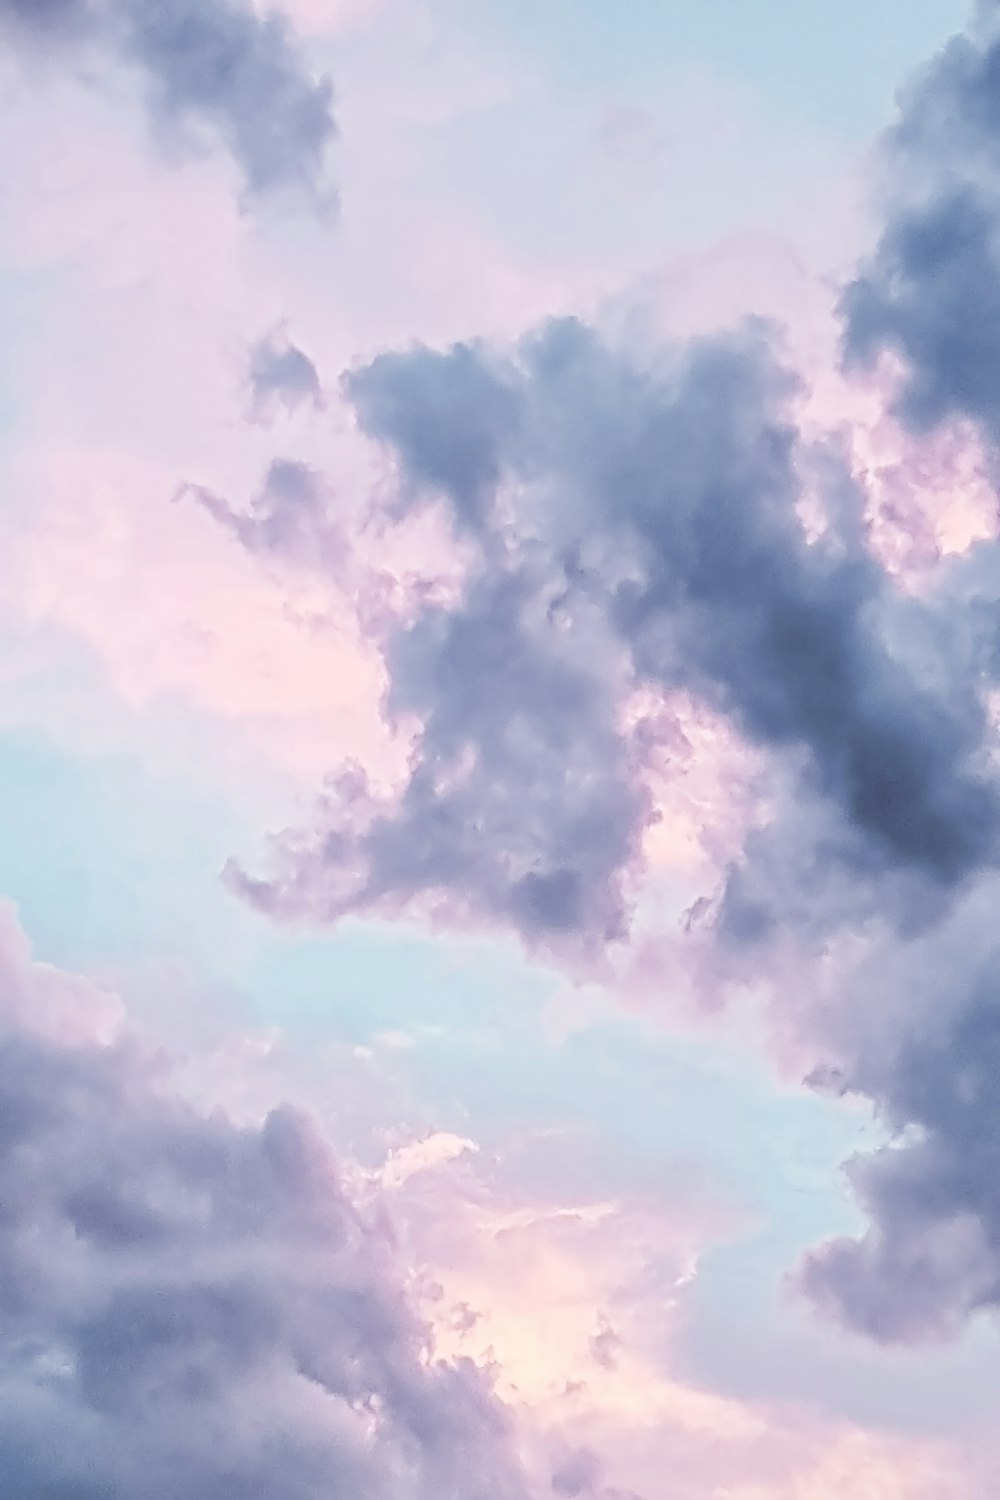 20 Clouds Pictures Download Free Images On Unsplash